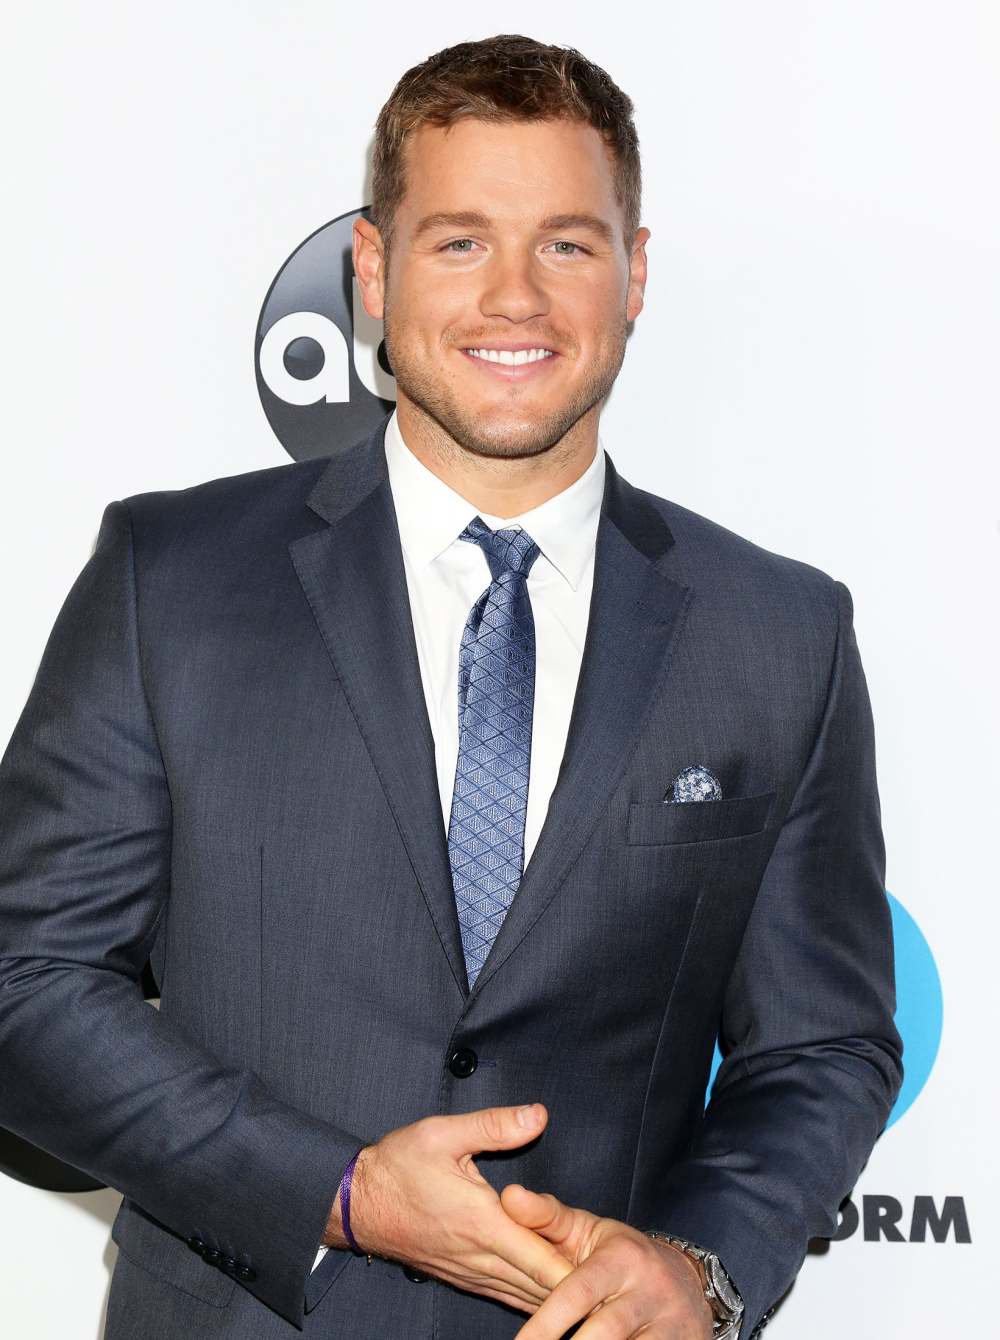 Colton Underwood Shows Off Fit Physique: 'I Prioritized My Health’ 